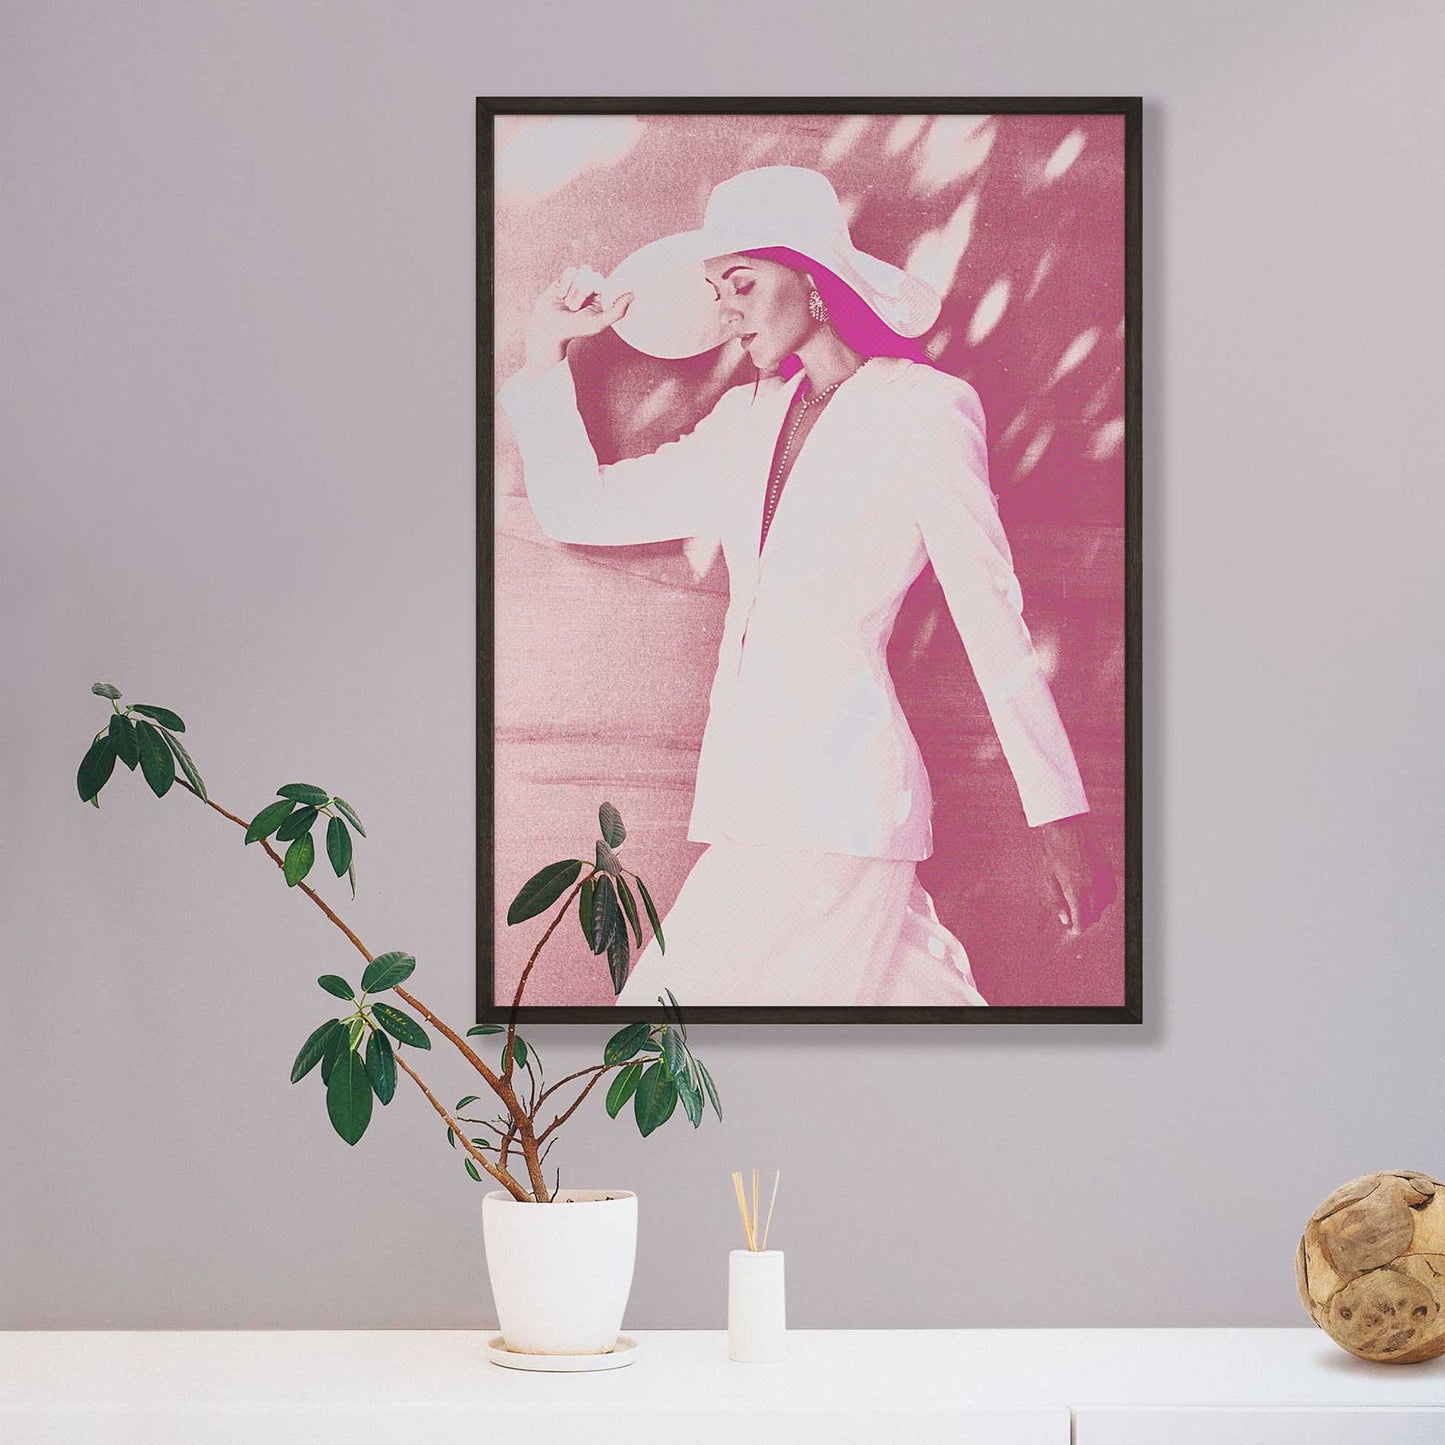 Elevate your interior design with the Personalised Pink Pop Art Framed Print, a cool and vibrant masterpiece. Inspired by pop art, this print features a halftone effect and vivid colors that bring excitement and happiness to any space